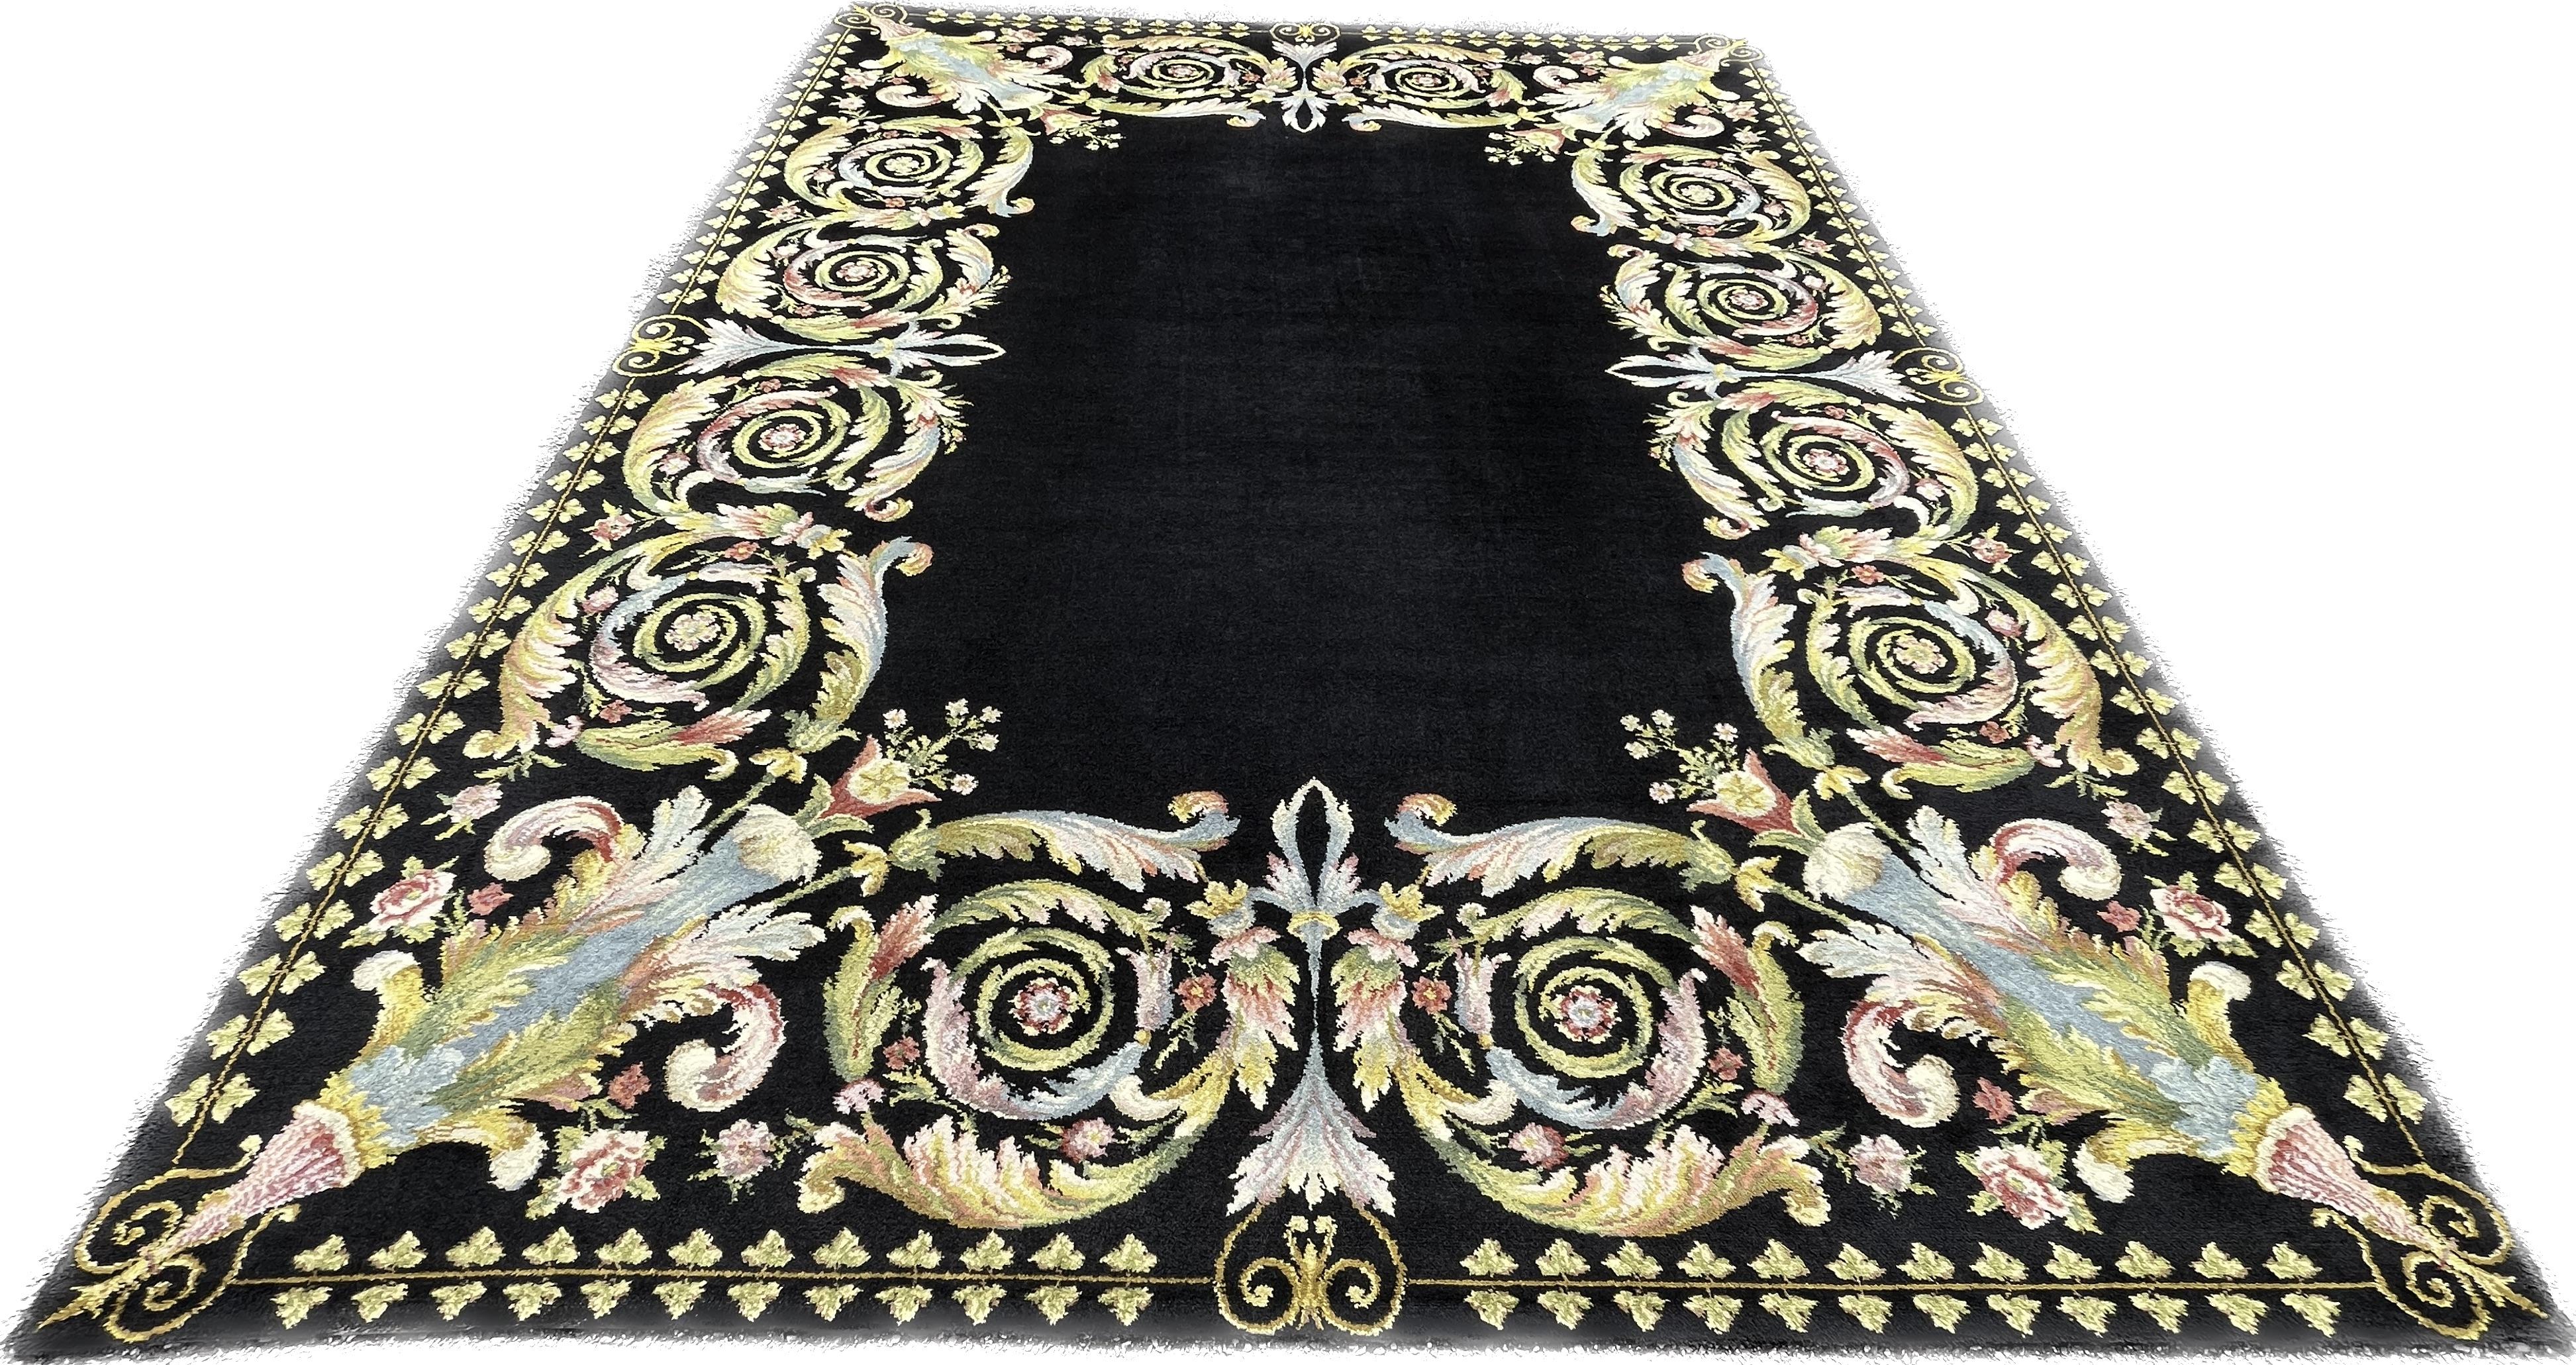 European Carpet in the taste of Savonnerie. 

The French Savonnerie factory was the most prestigious European manufacturer of knotted pile carpets. The production was born from a carpet factory created in a disused soap factory on the Quai de